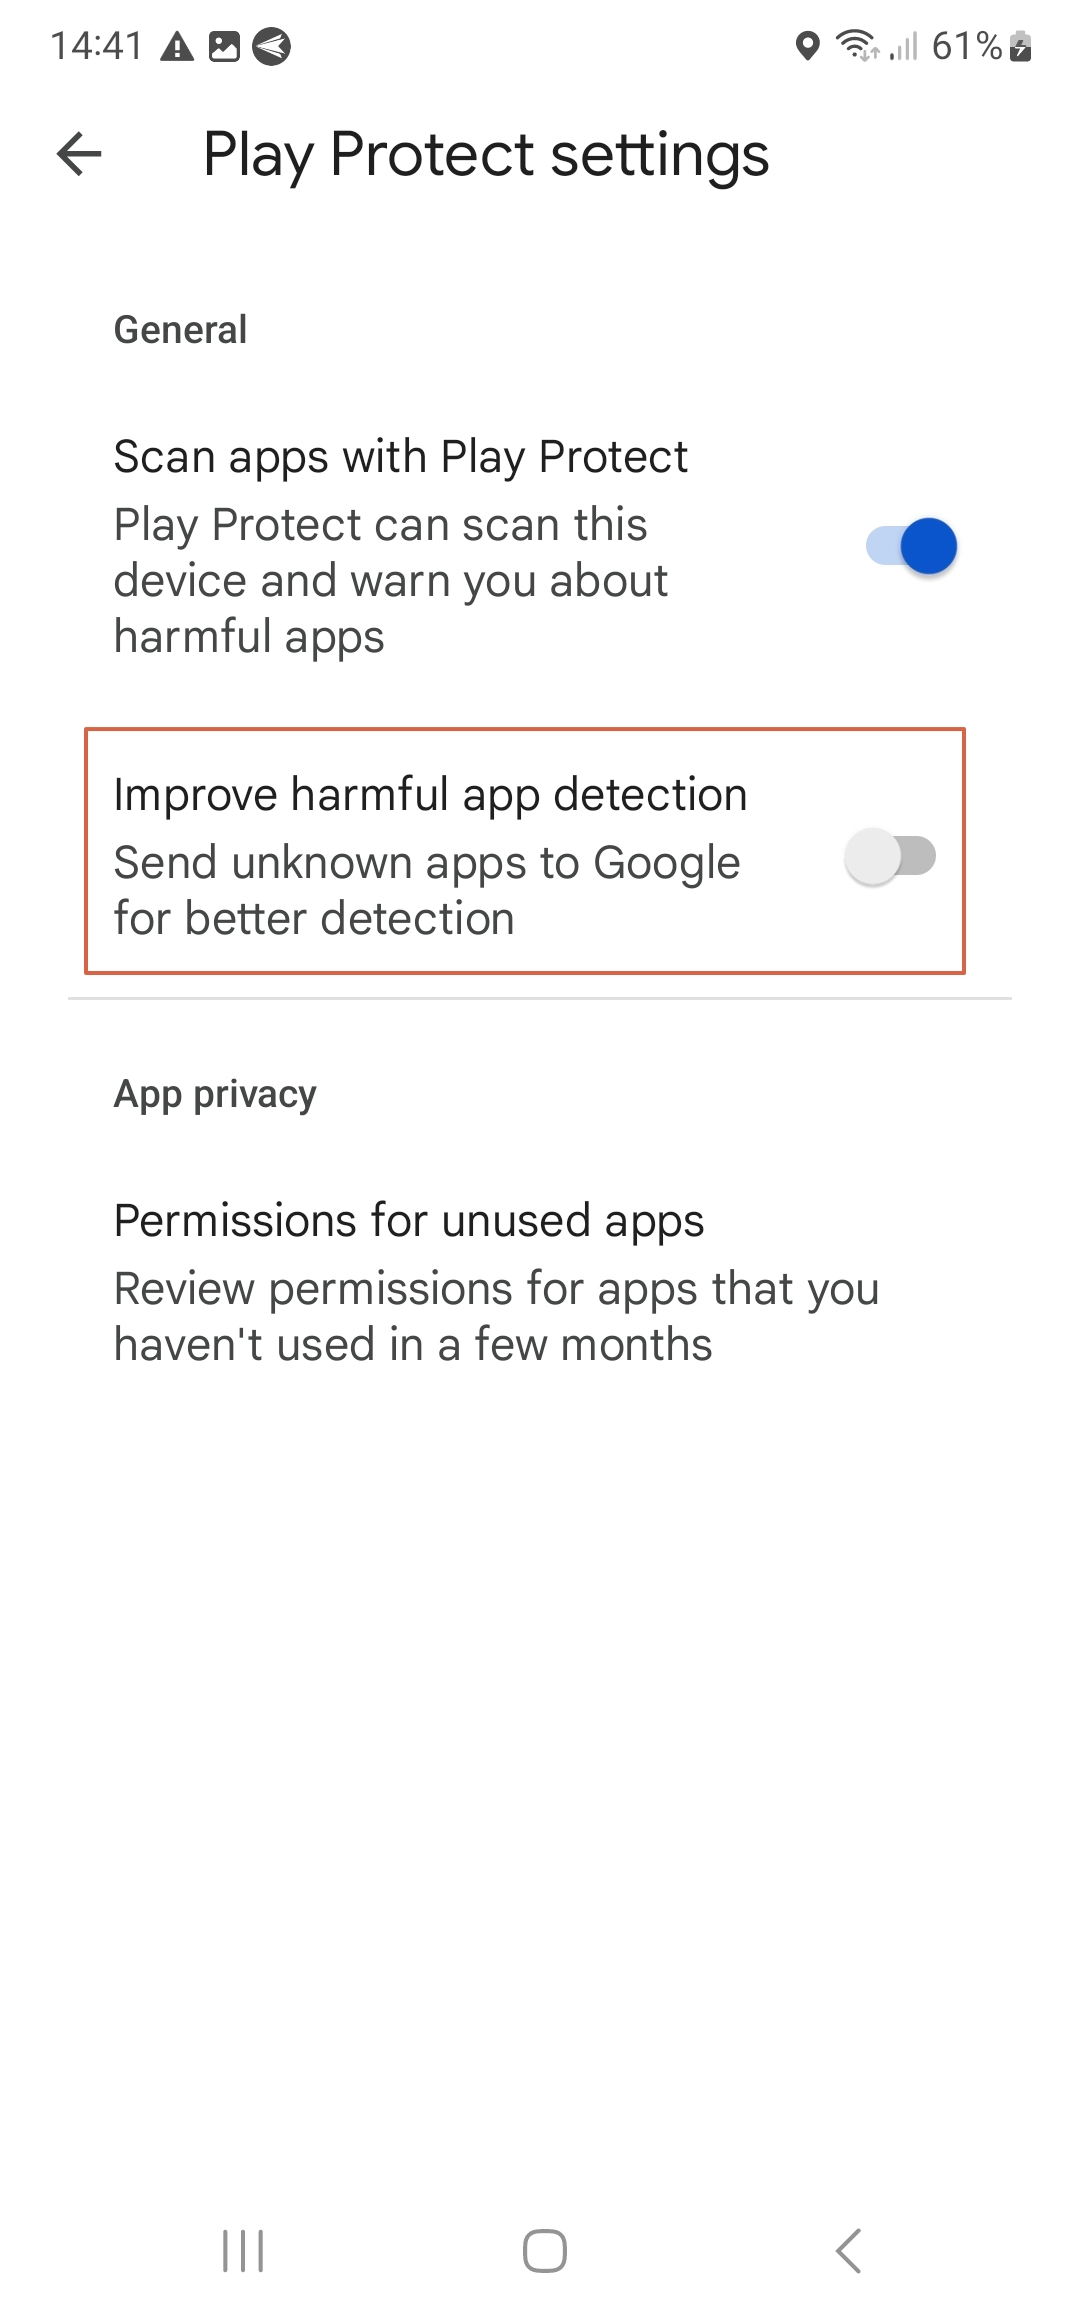 Disable Sending Unknown Apps to Google